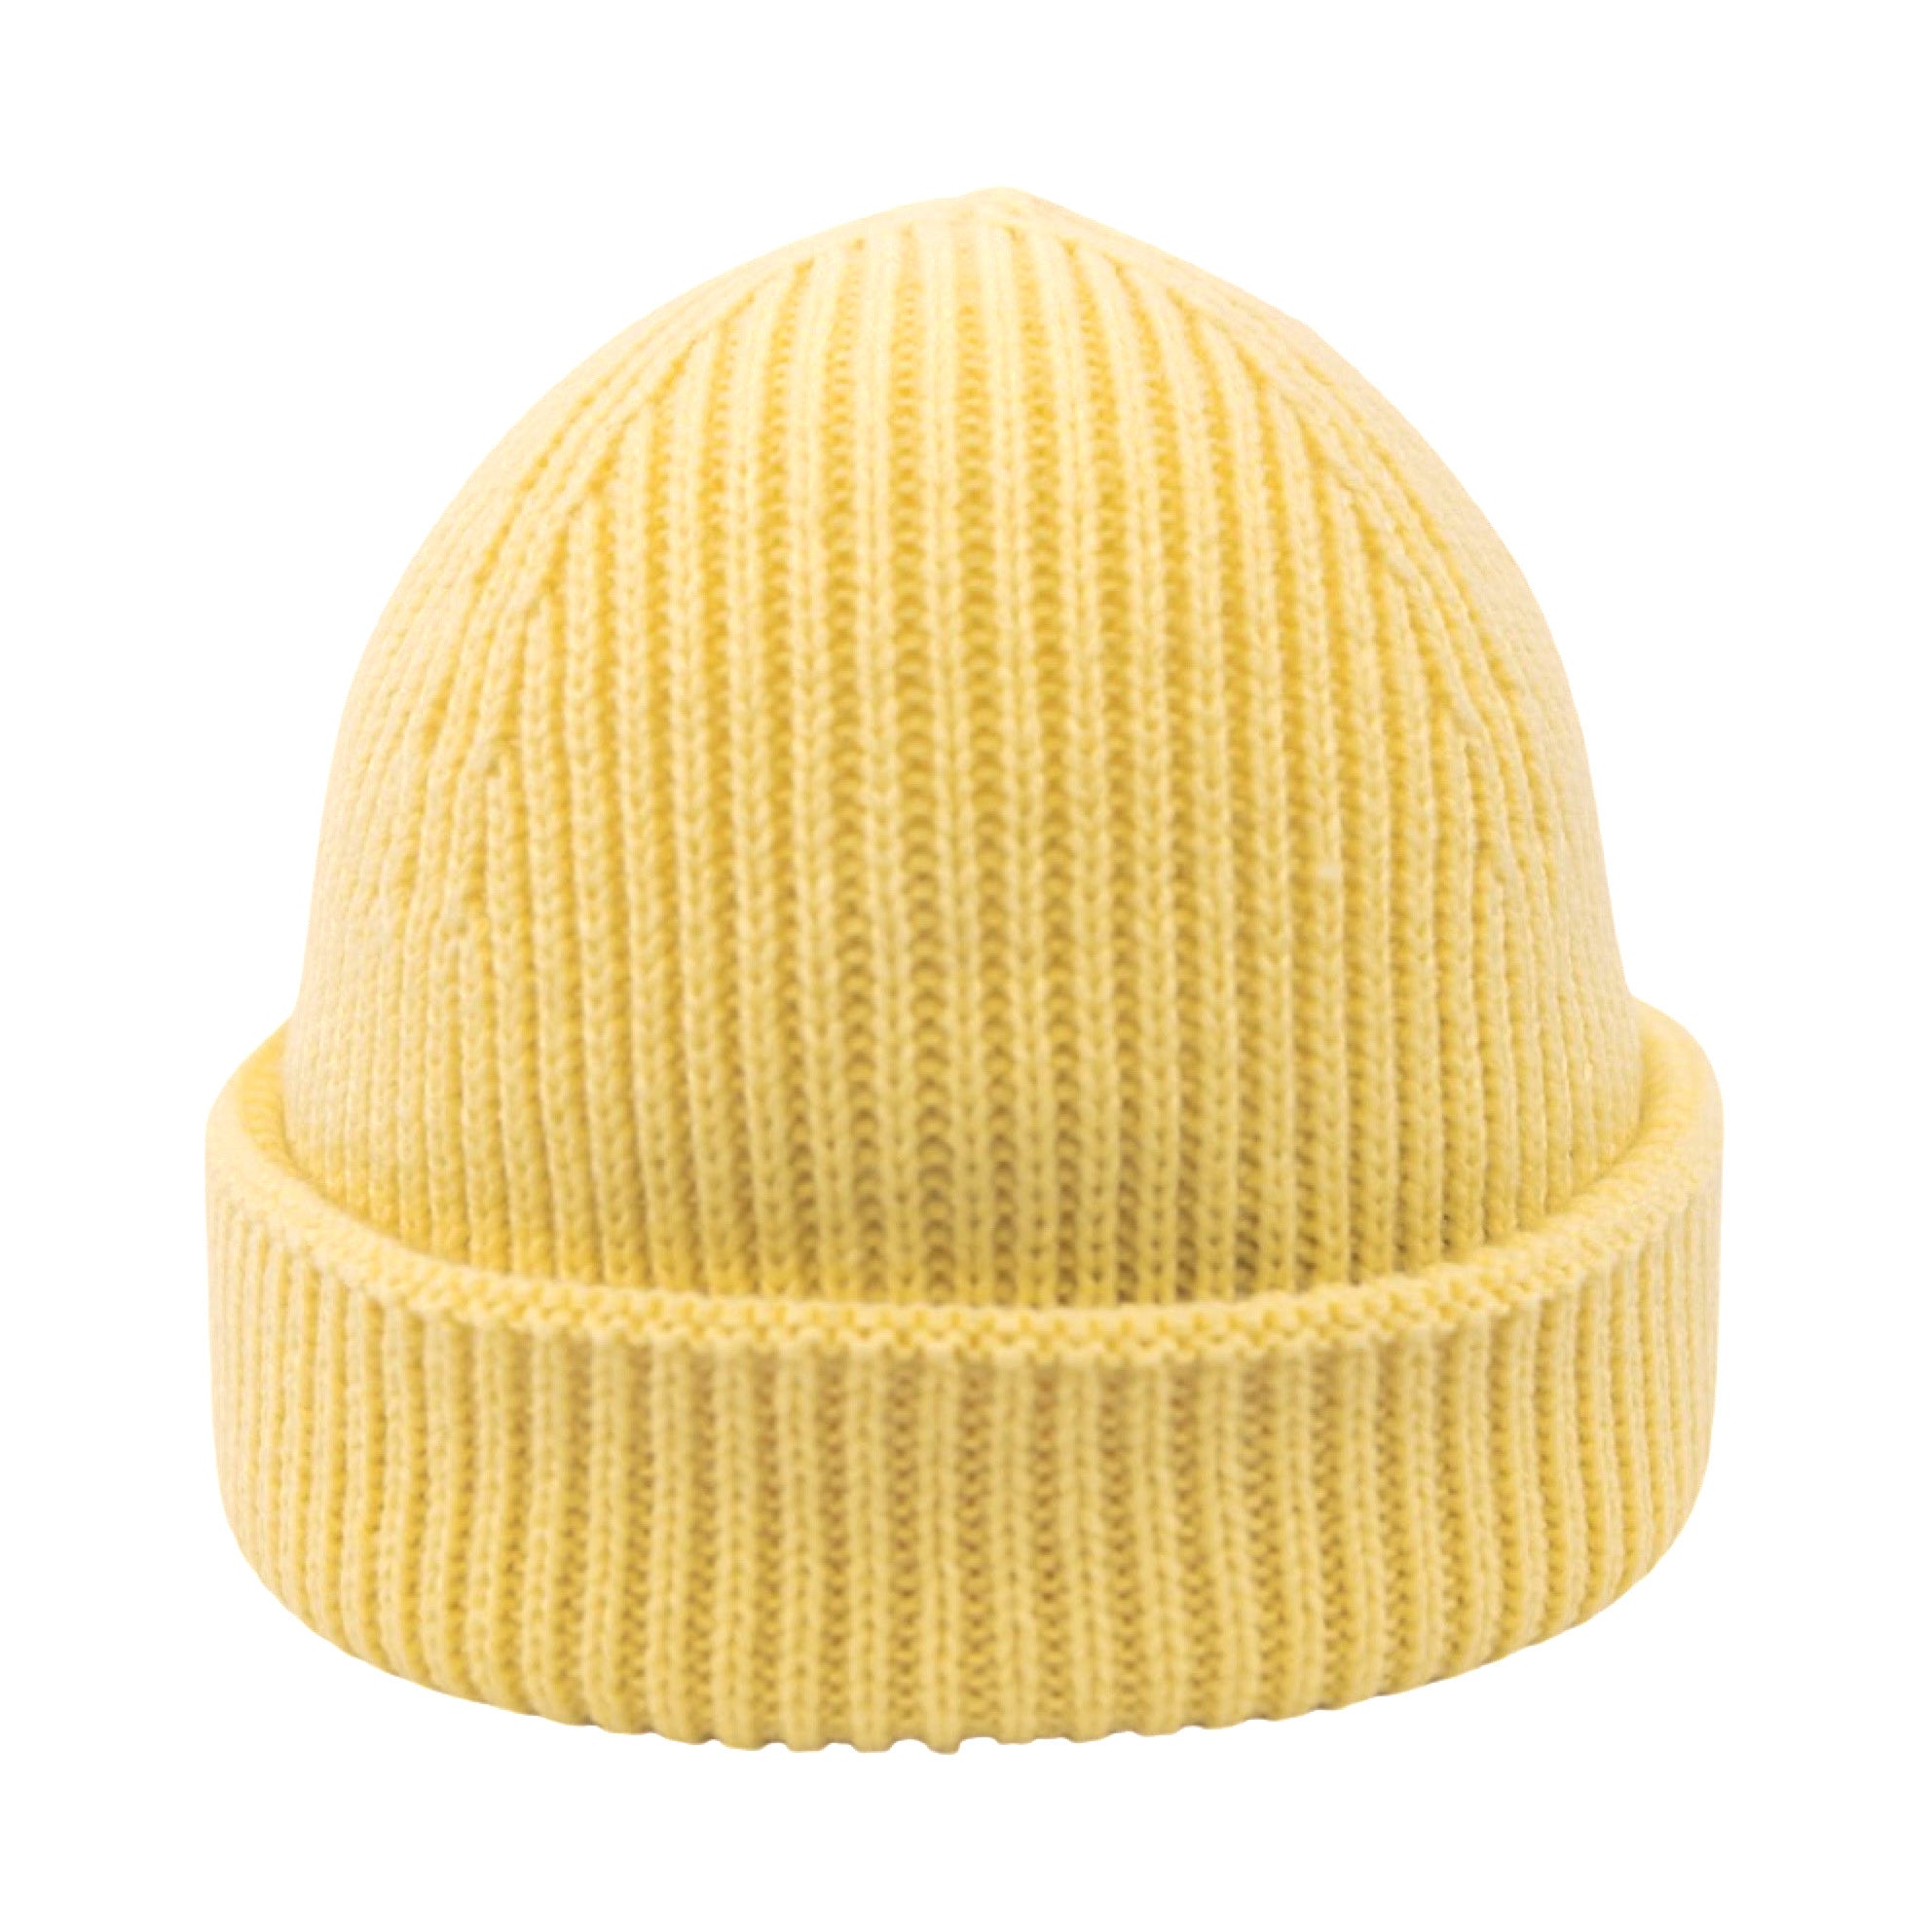 COLR by uLace Beanie - Canary